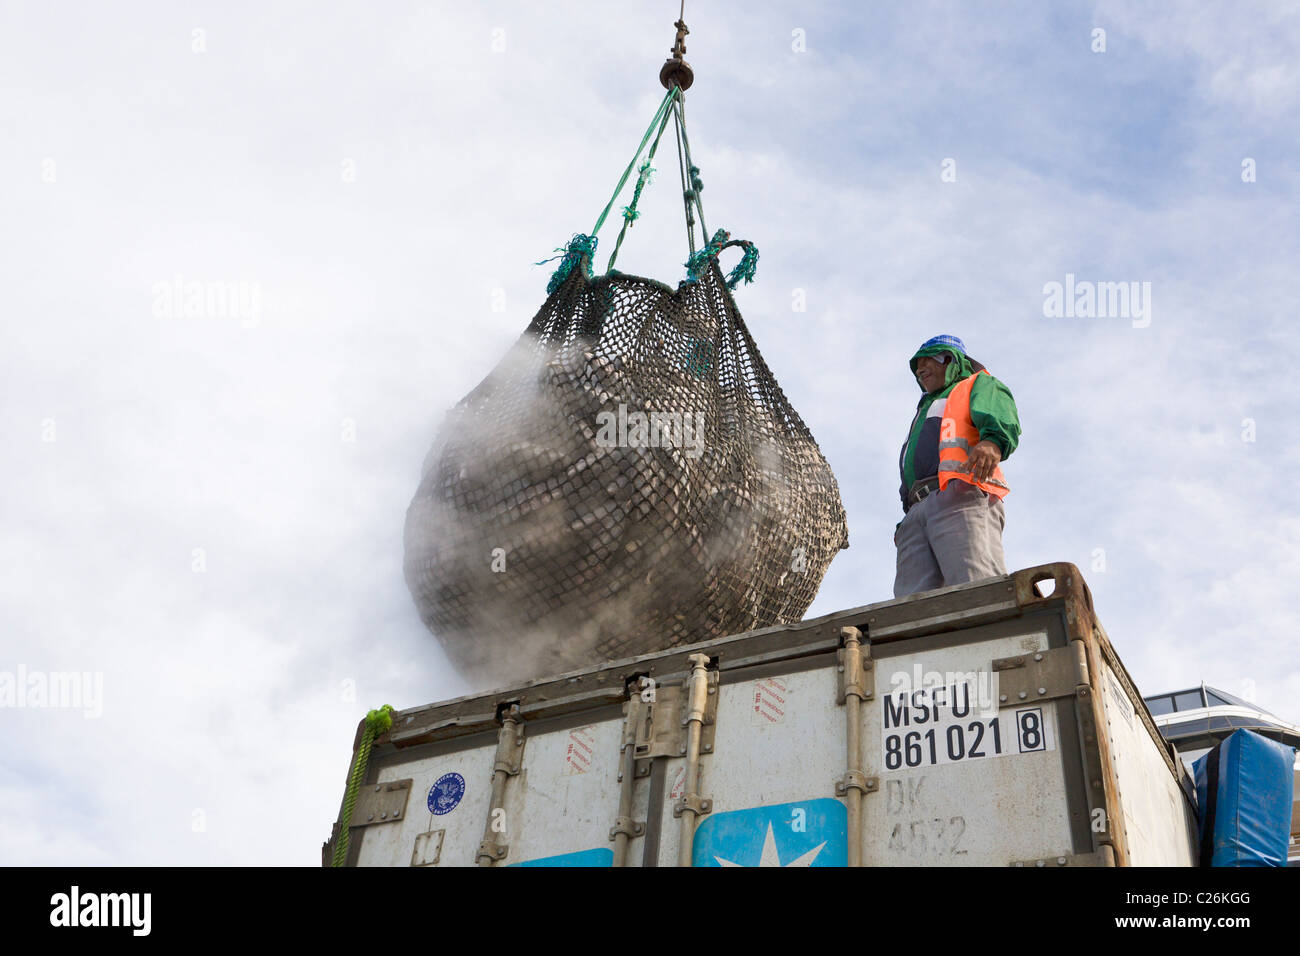 Tuna being unloaded from fishing boat to container, Manta, Ecuador Stock Photo